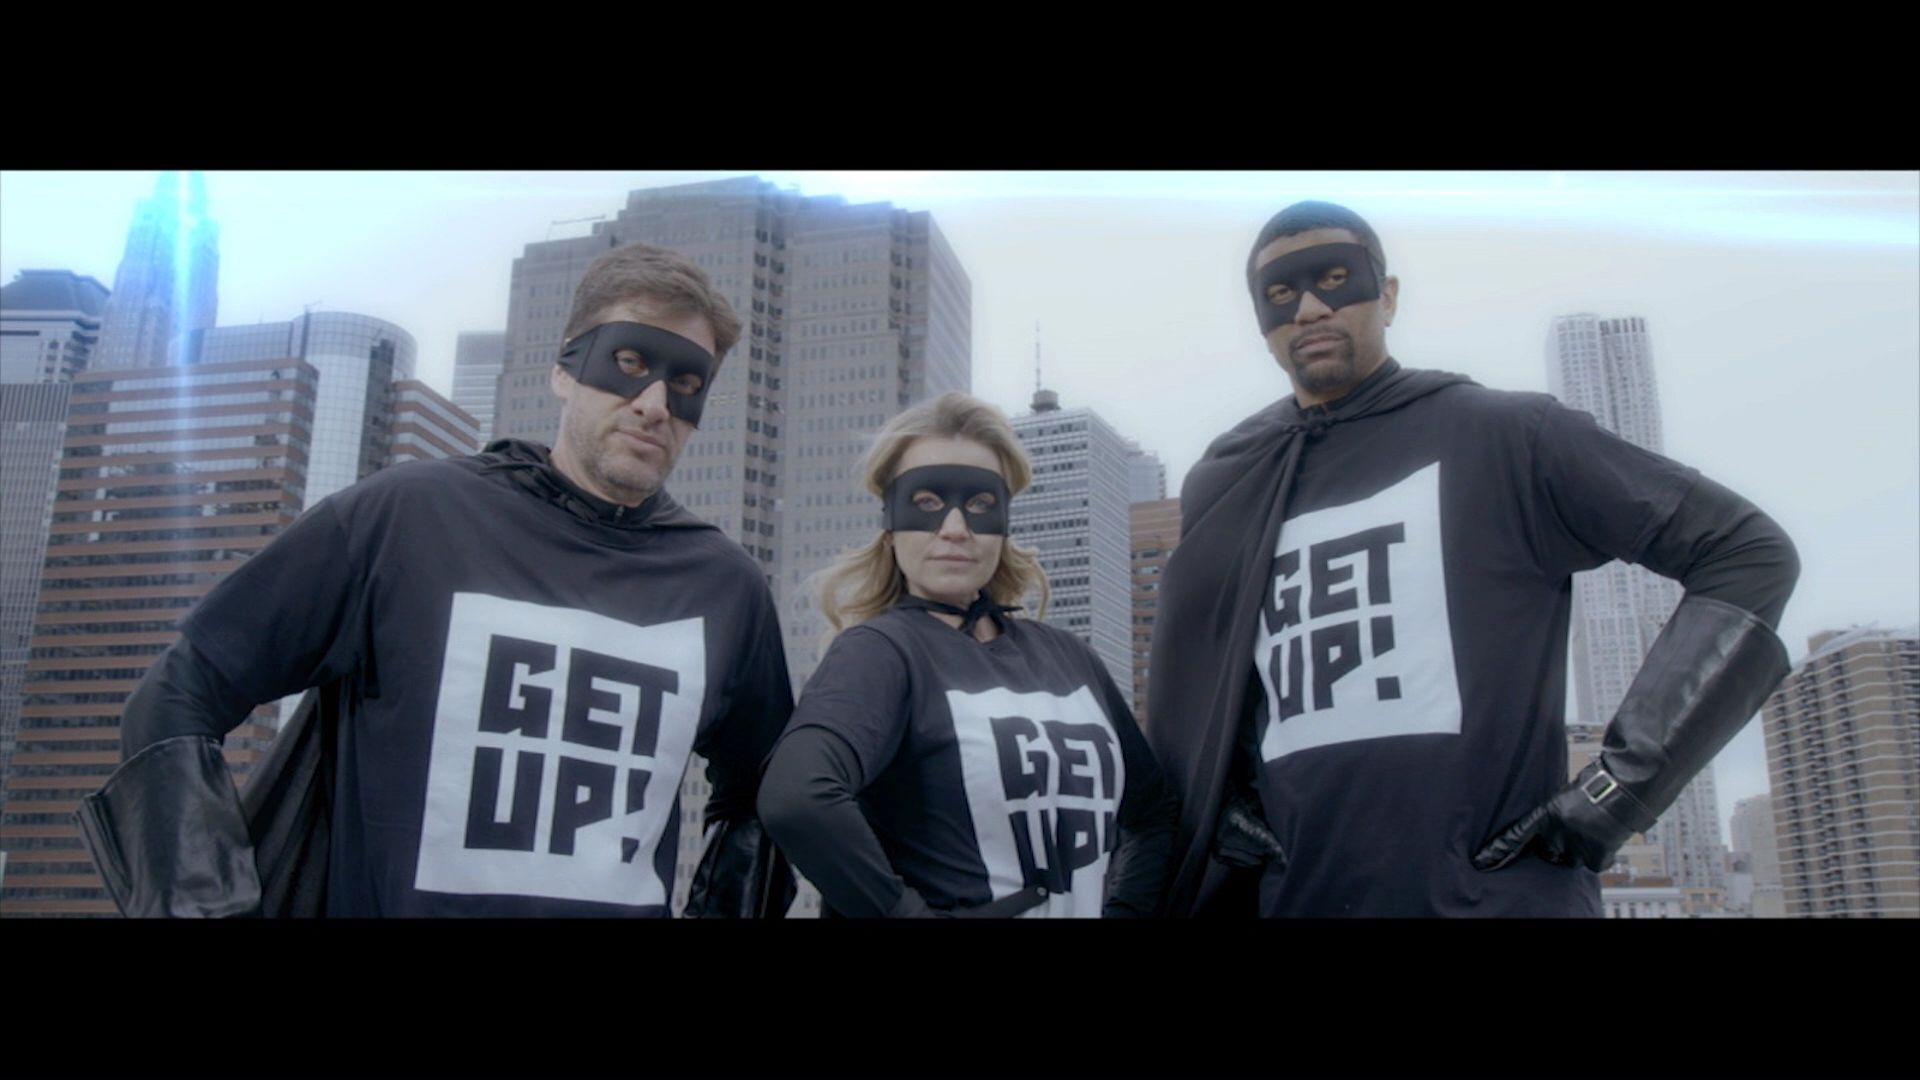 Get Up! gets the official movie trailer treatment ESPN Video